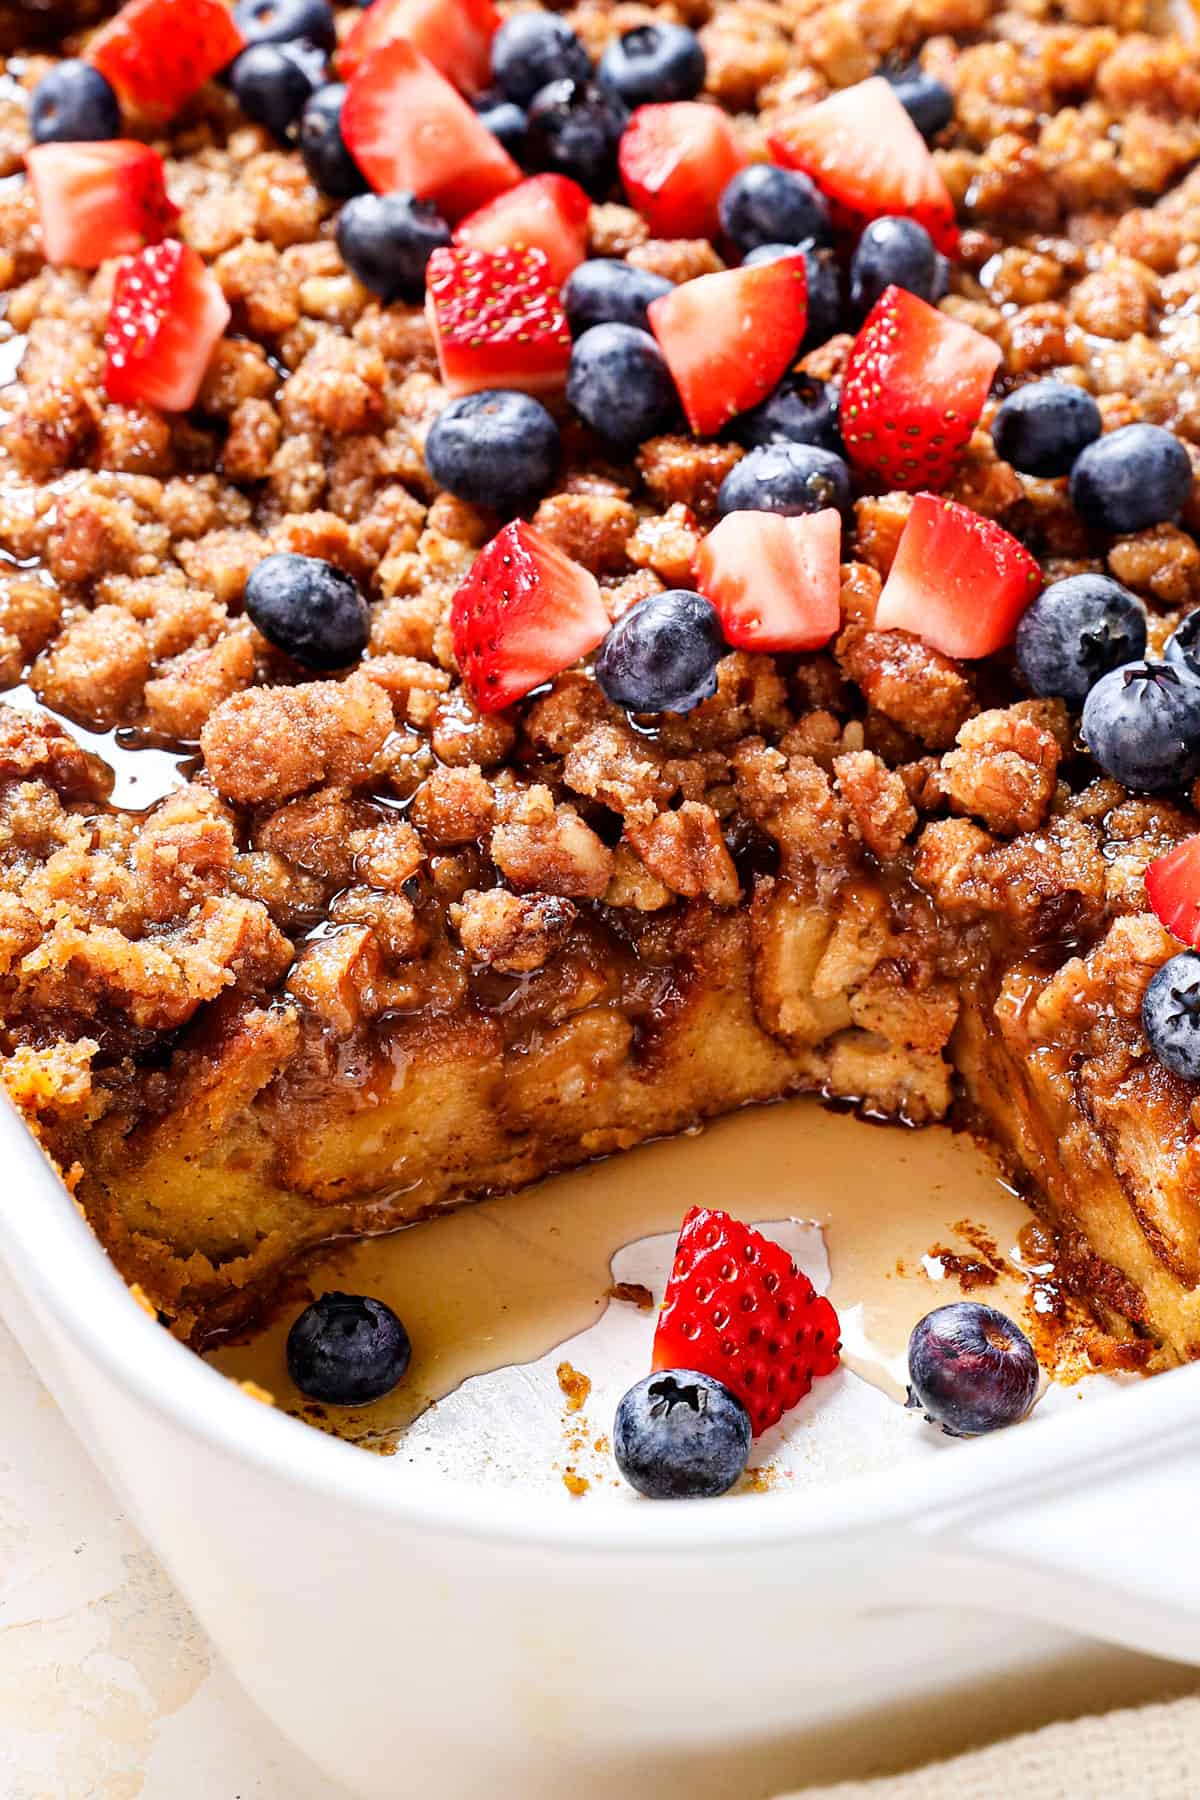 up close of Baked French Toast recipe showing how soft, yet not mushy, the bread is